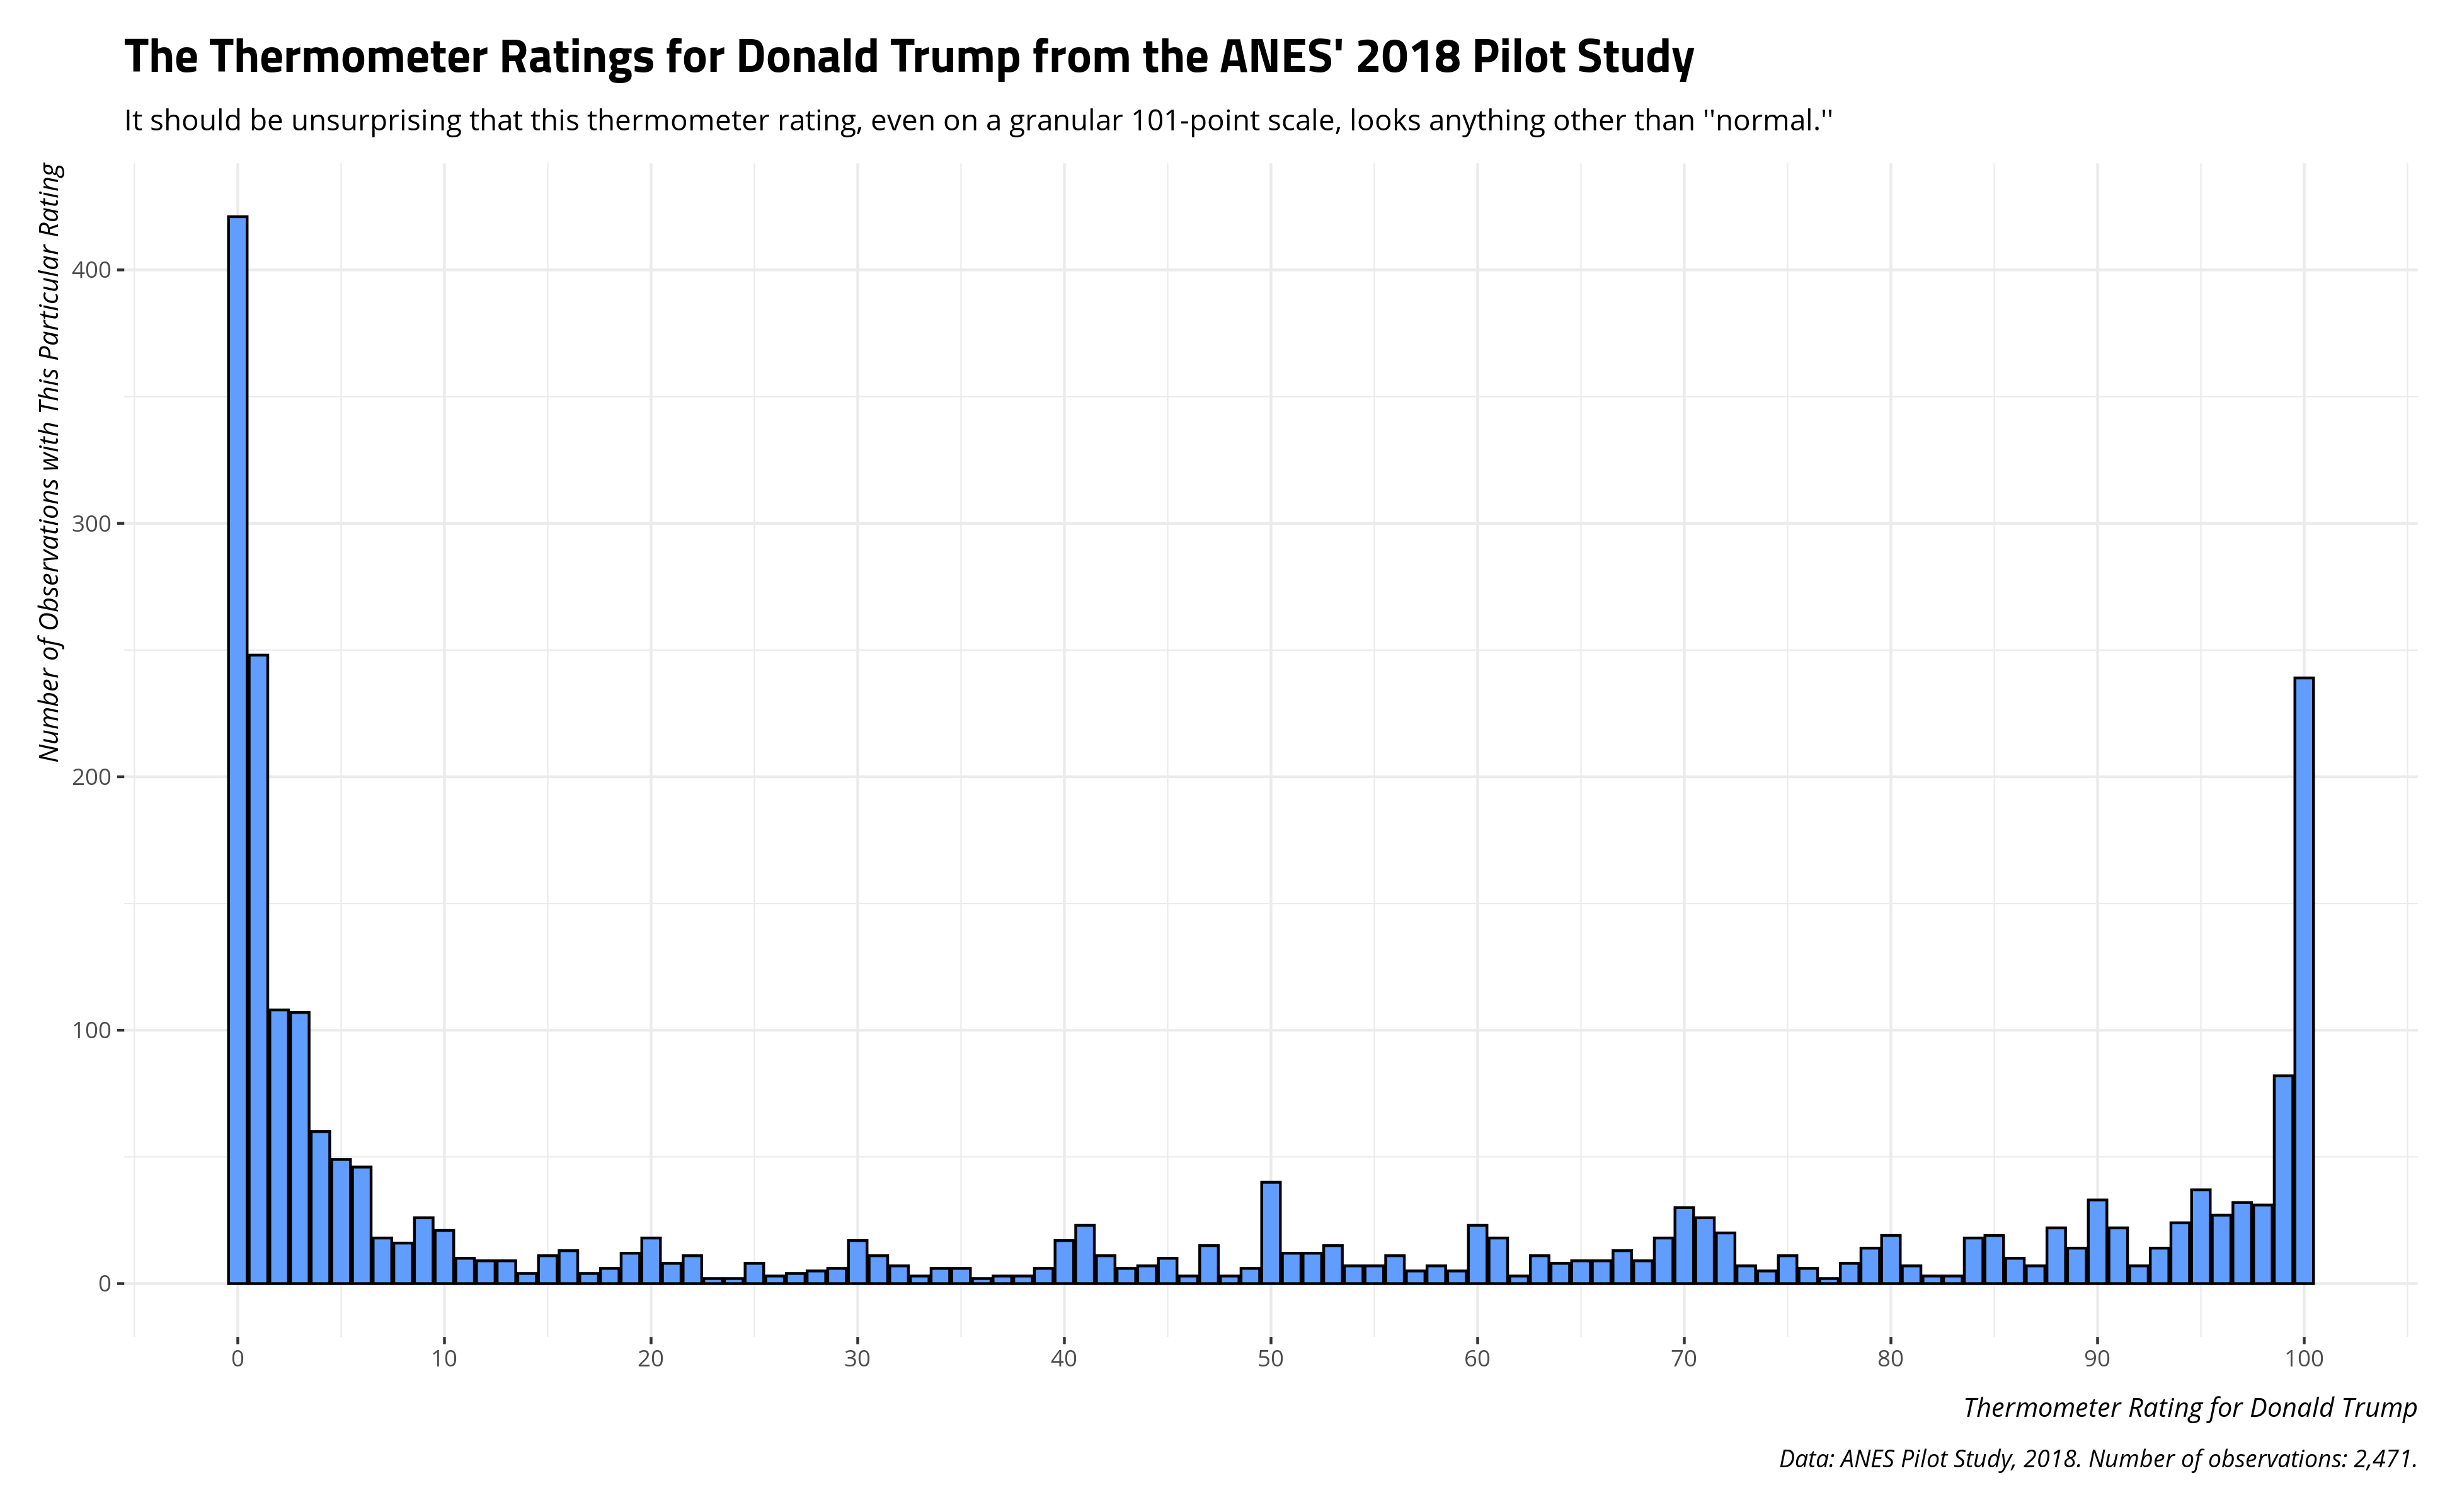 plot of chunk thermometer-rating-donald-trump-anes-2018